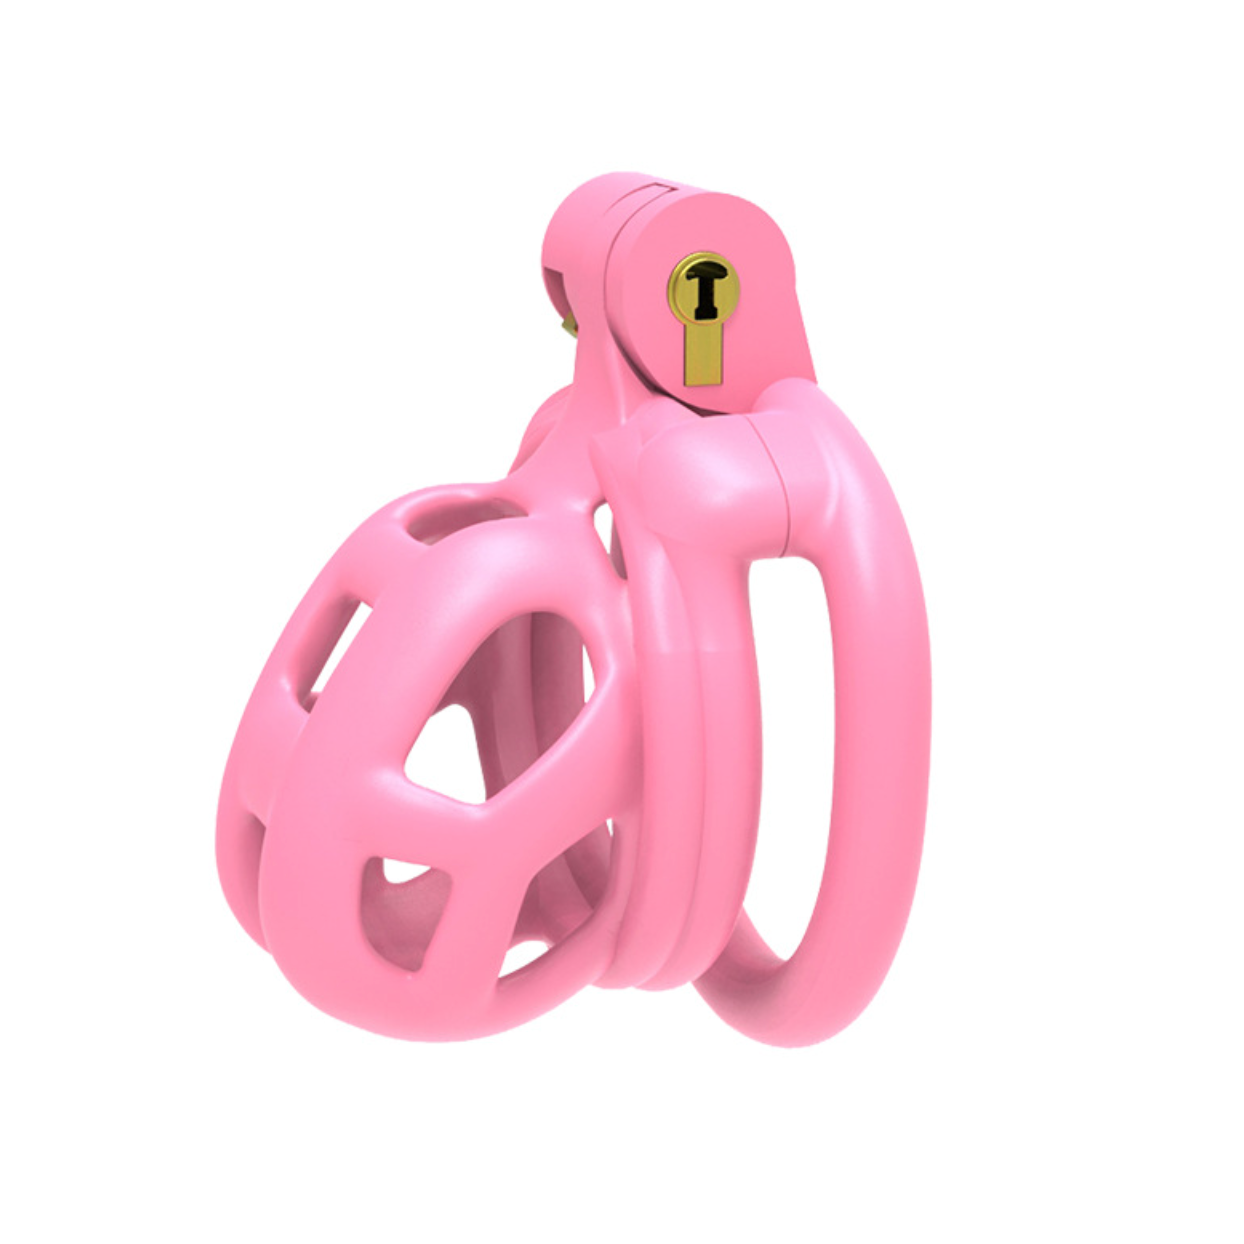 Pink Chastity Cuckold Device Male Cage 3D Print BDSM  [Cage + 4 Rings]  粉色贞操男用 BDSM  1611